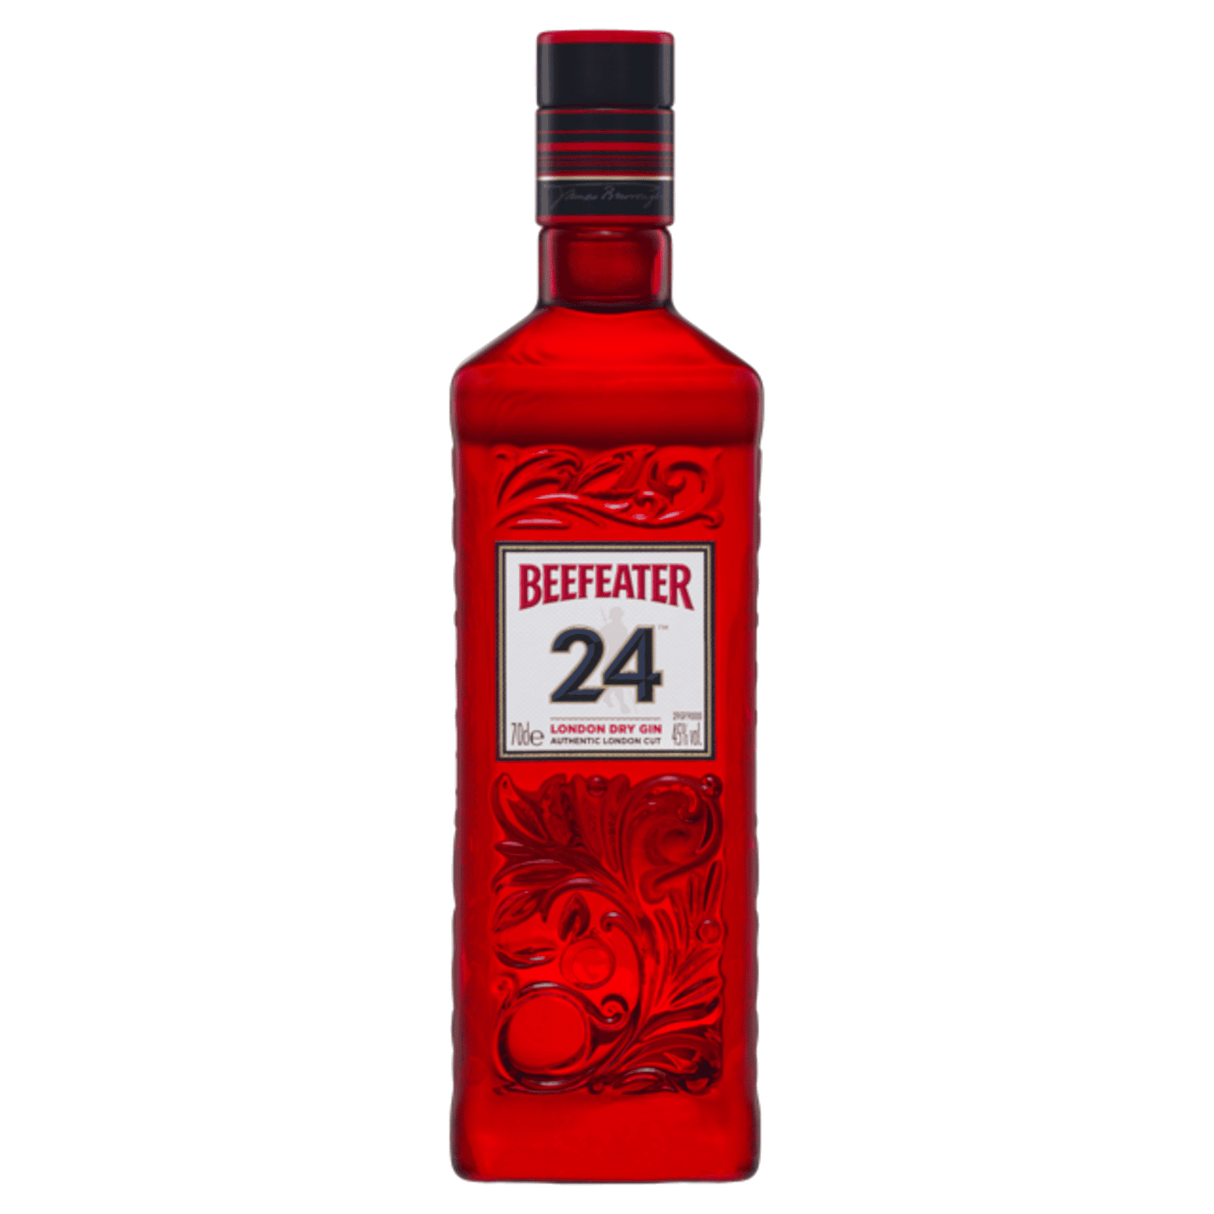 Beefeater 24 London Dry Gin 700ml